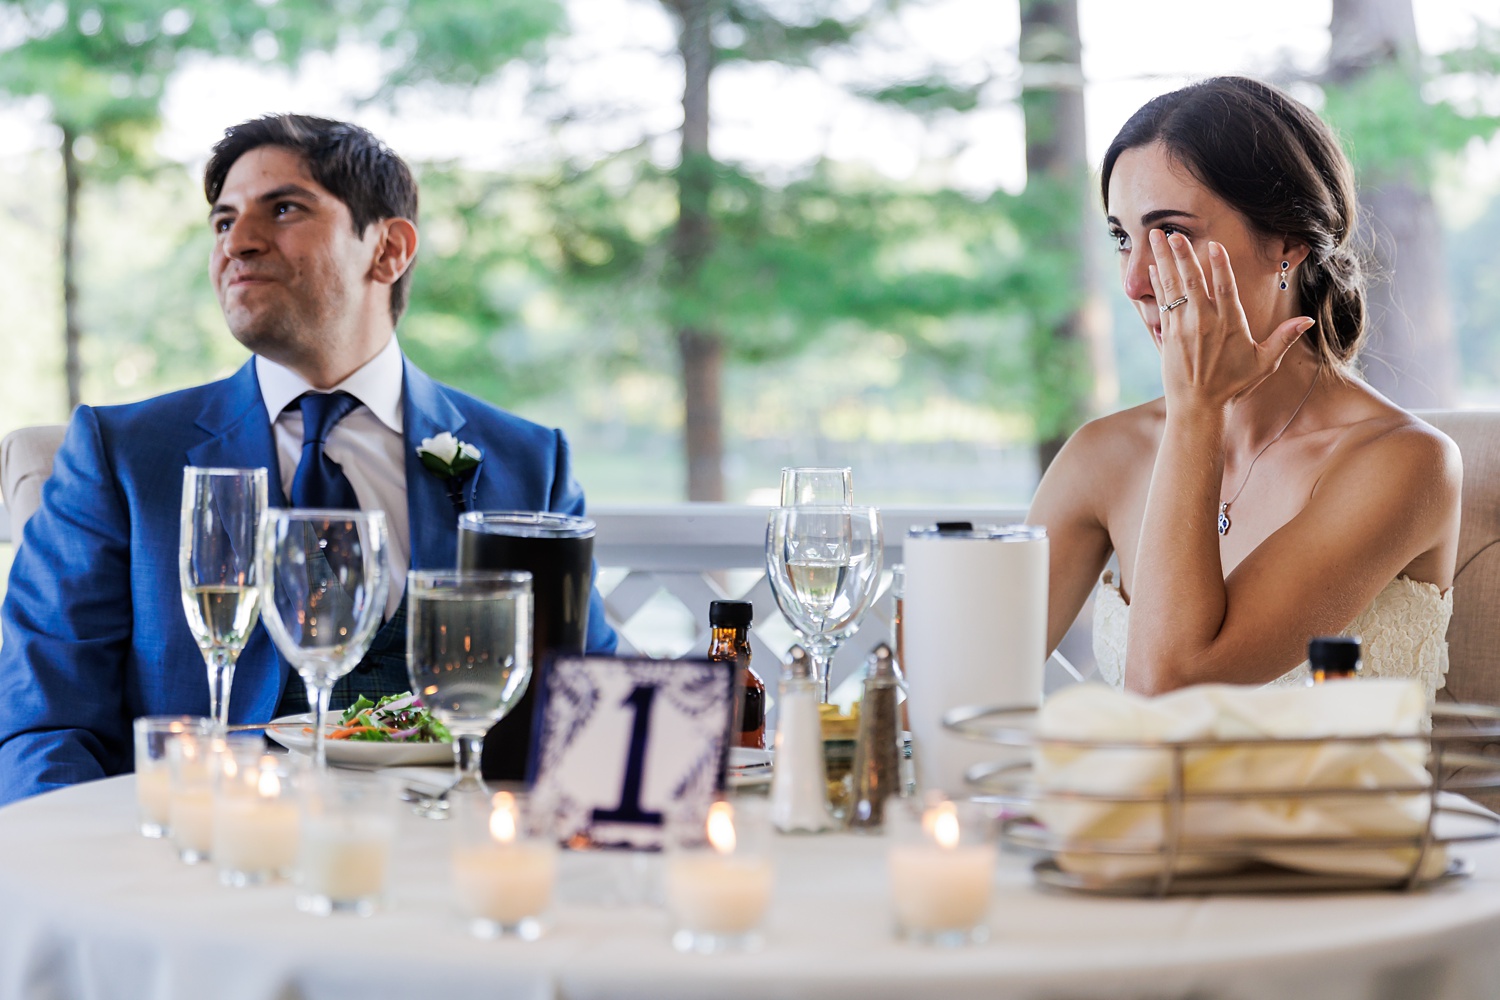 Tearing up at the wedding day toasts